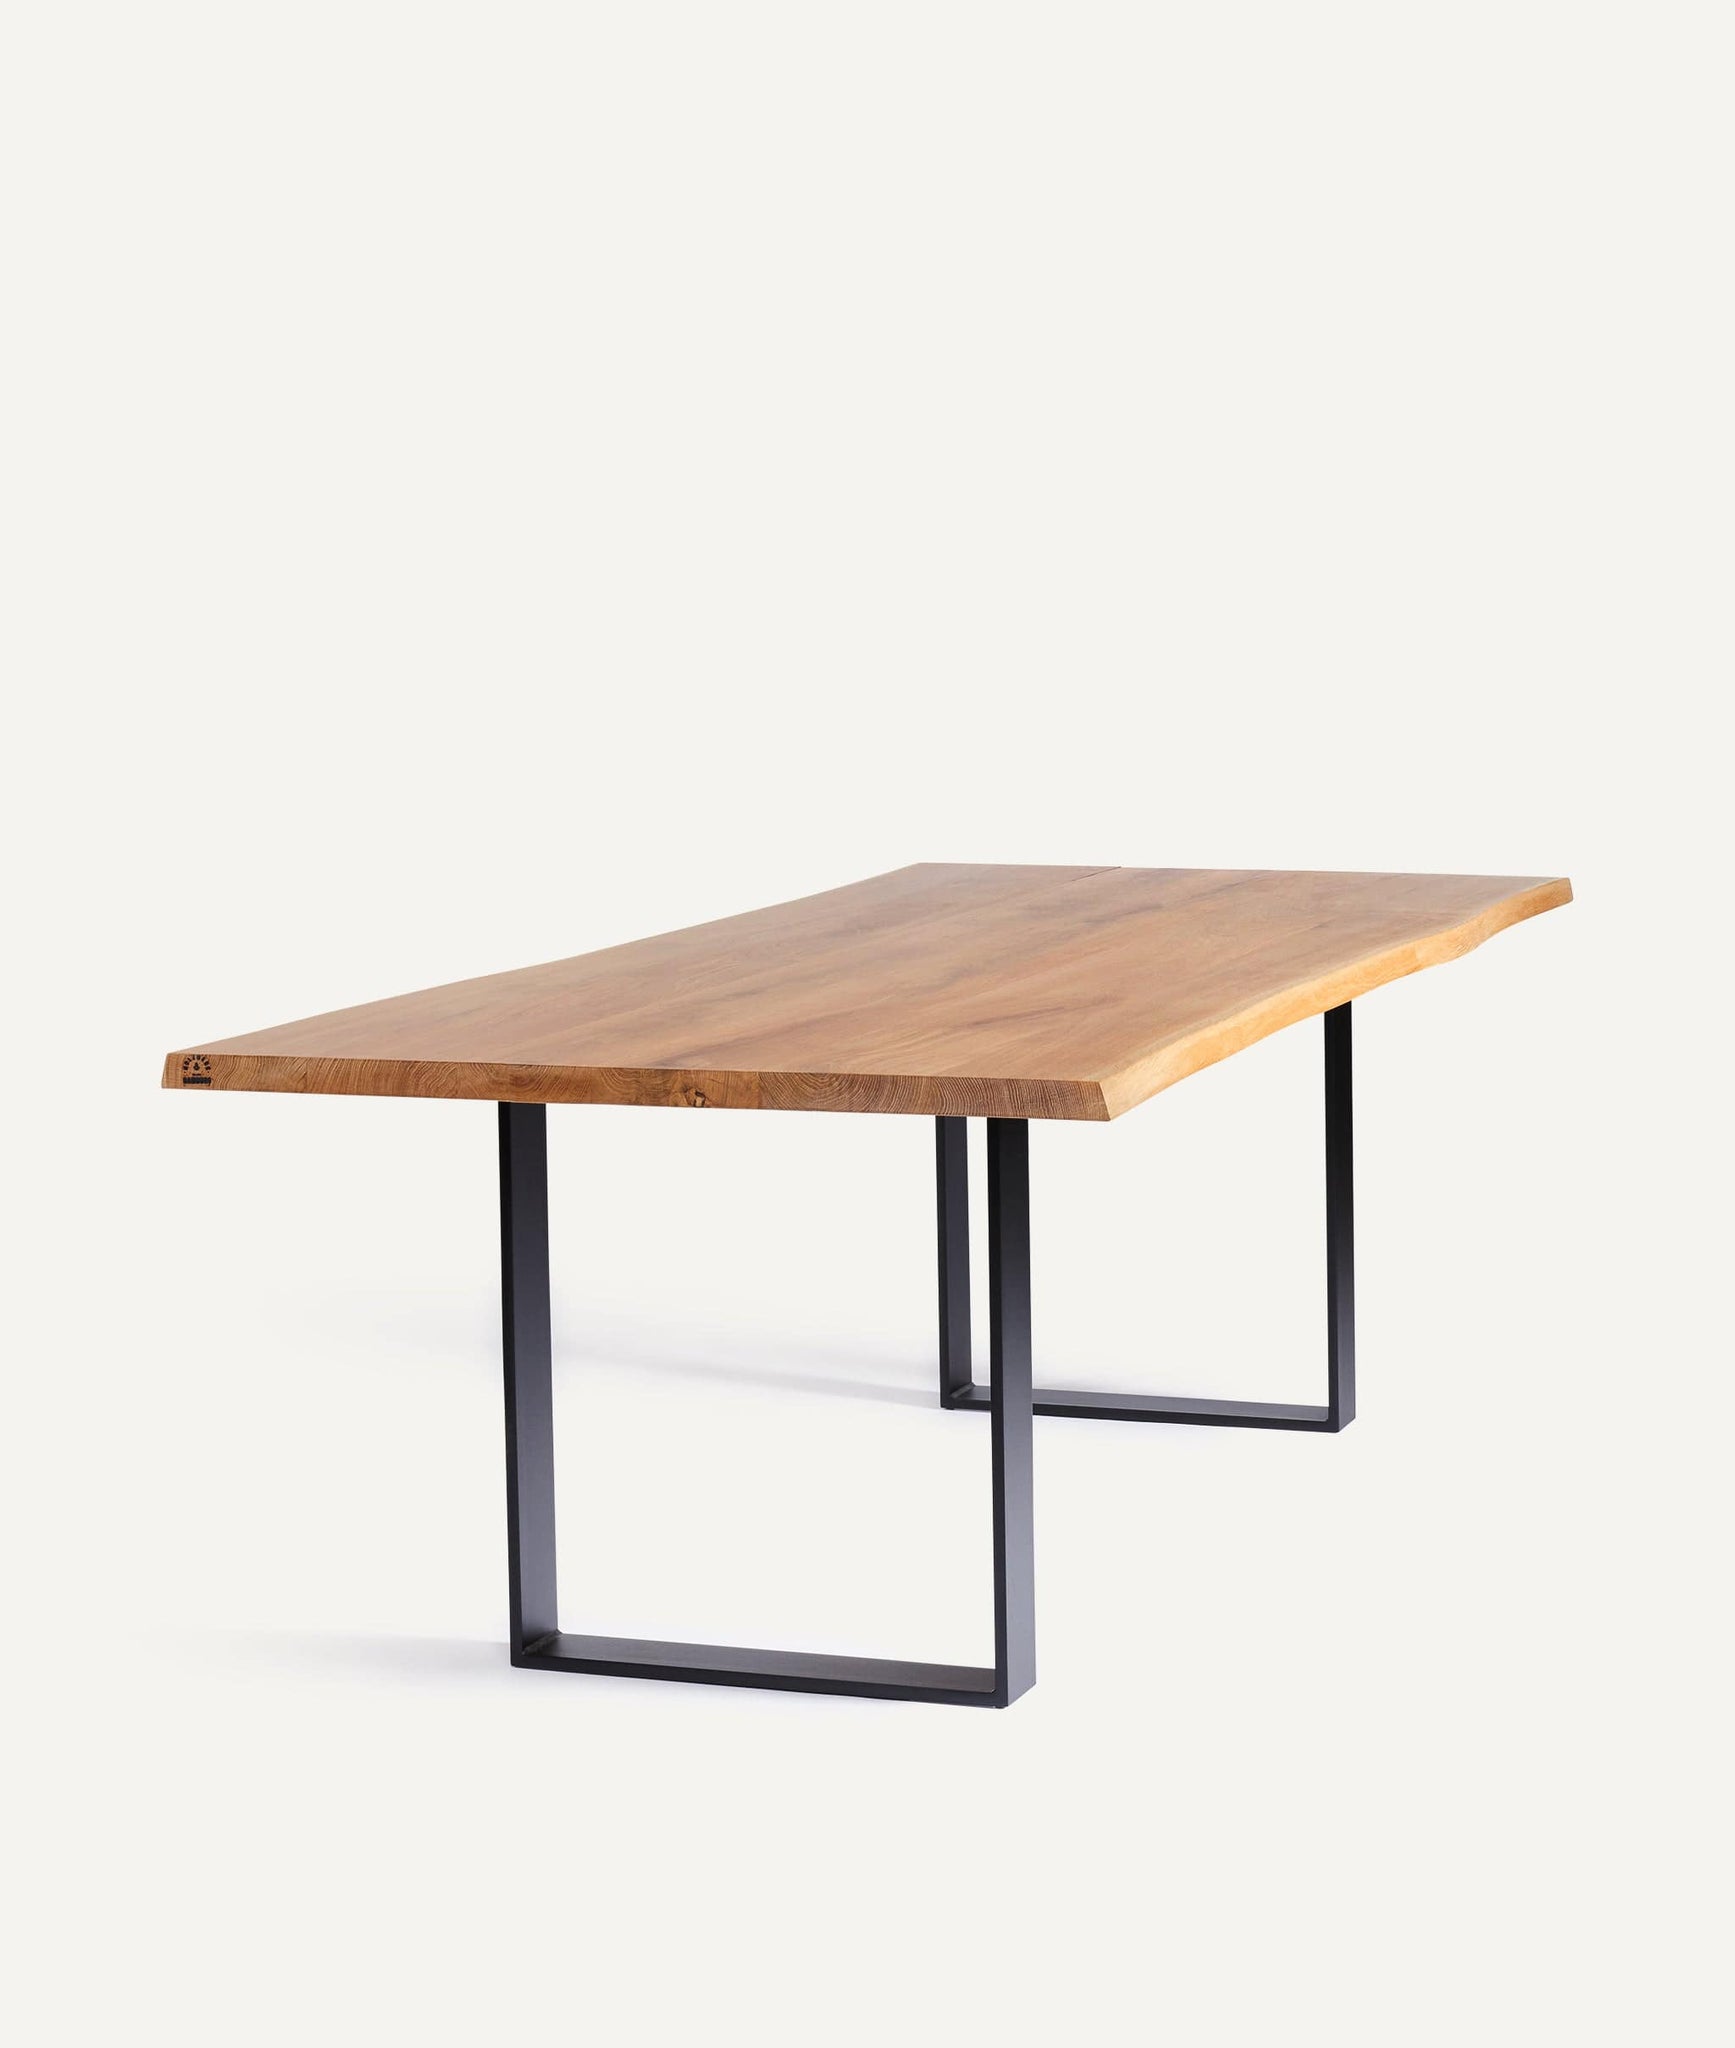 Solid Wood Table in Walnut Wood (natural edge) with Skid Frame